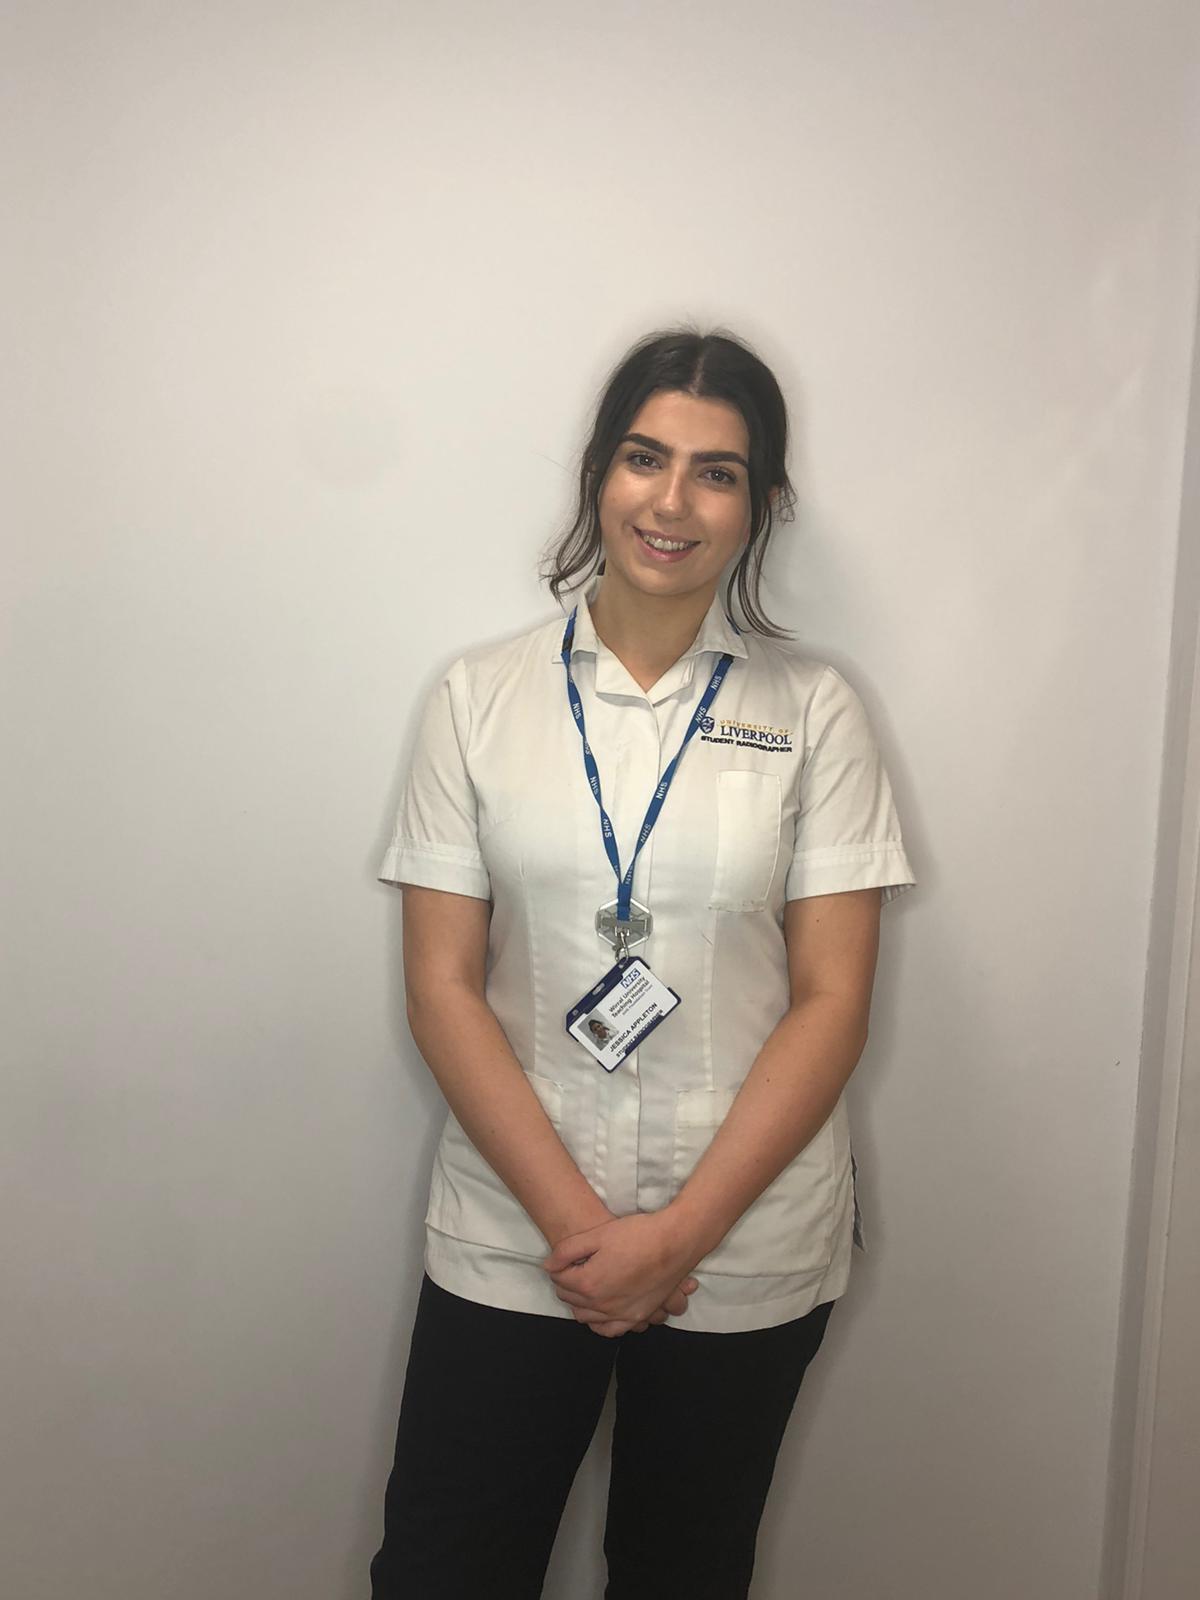 Student Jess on placement as part of her studies